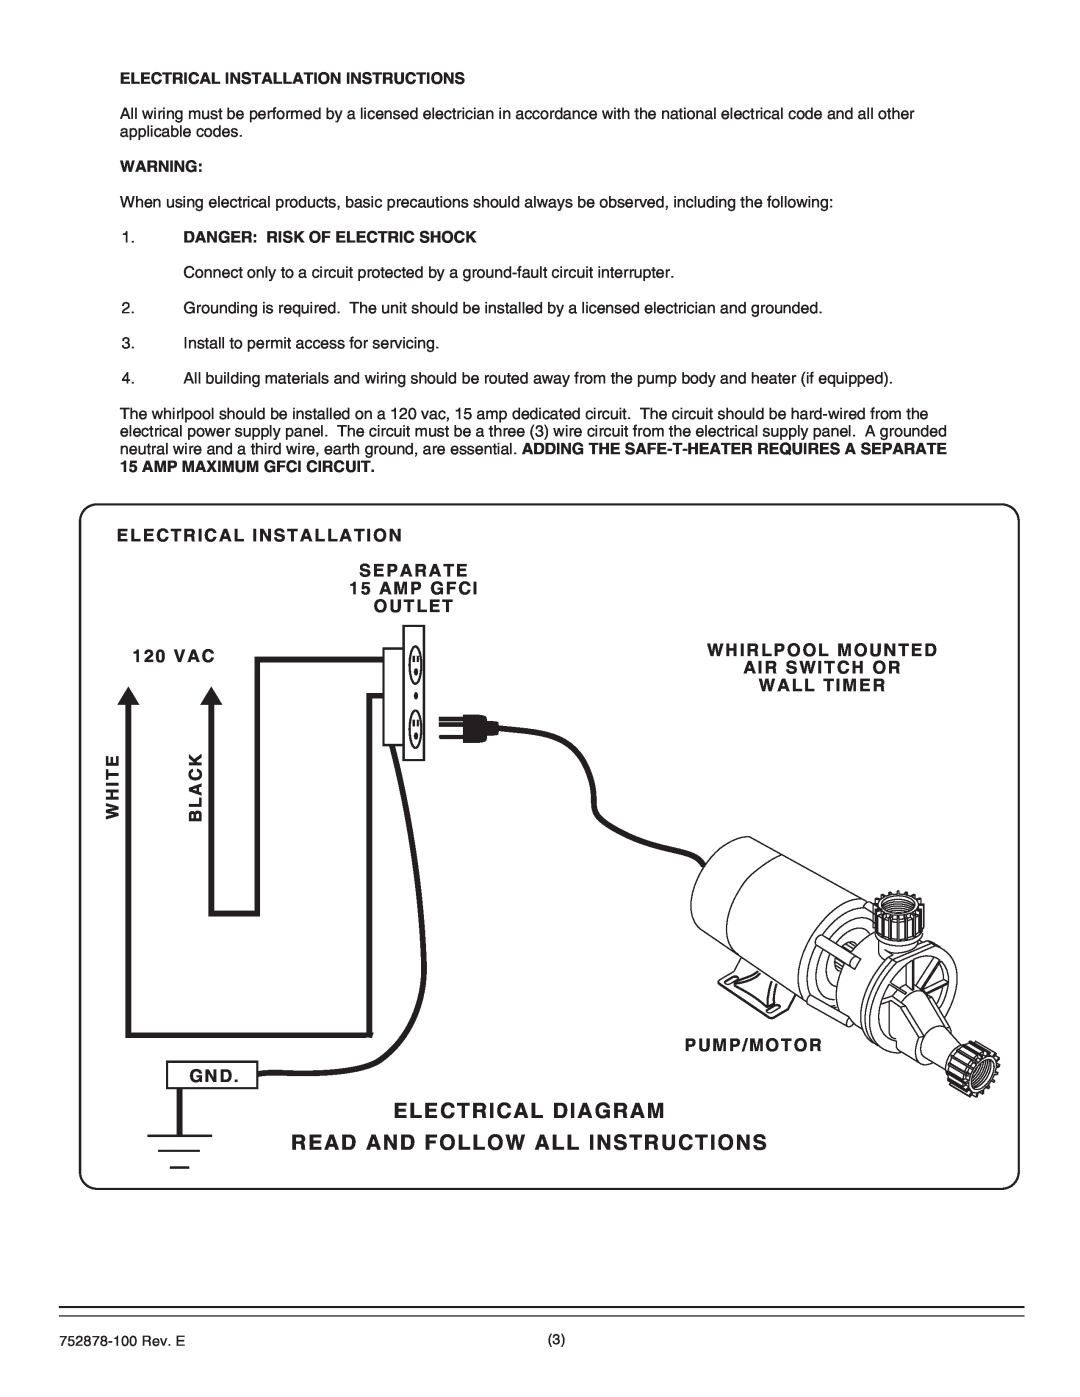 American Standard 2903.XXXW Electrical Diagram Read And Follow All Instructions, 120 VAC, Whirlpool Mounted, Air Switch Or 